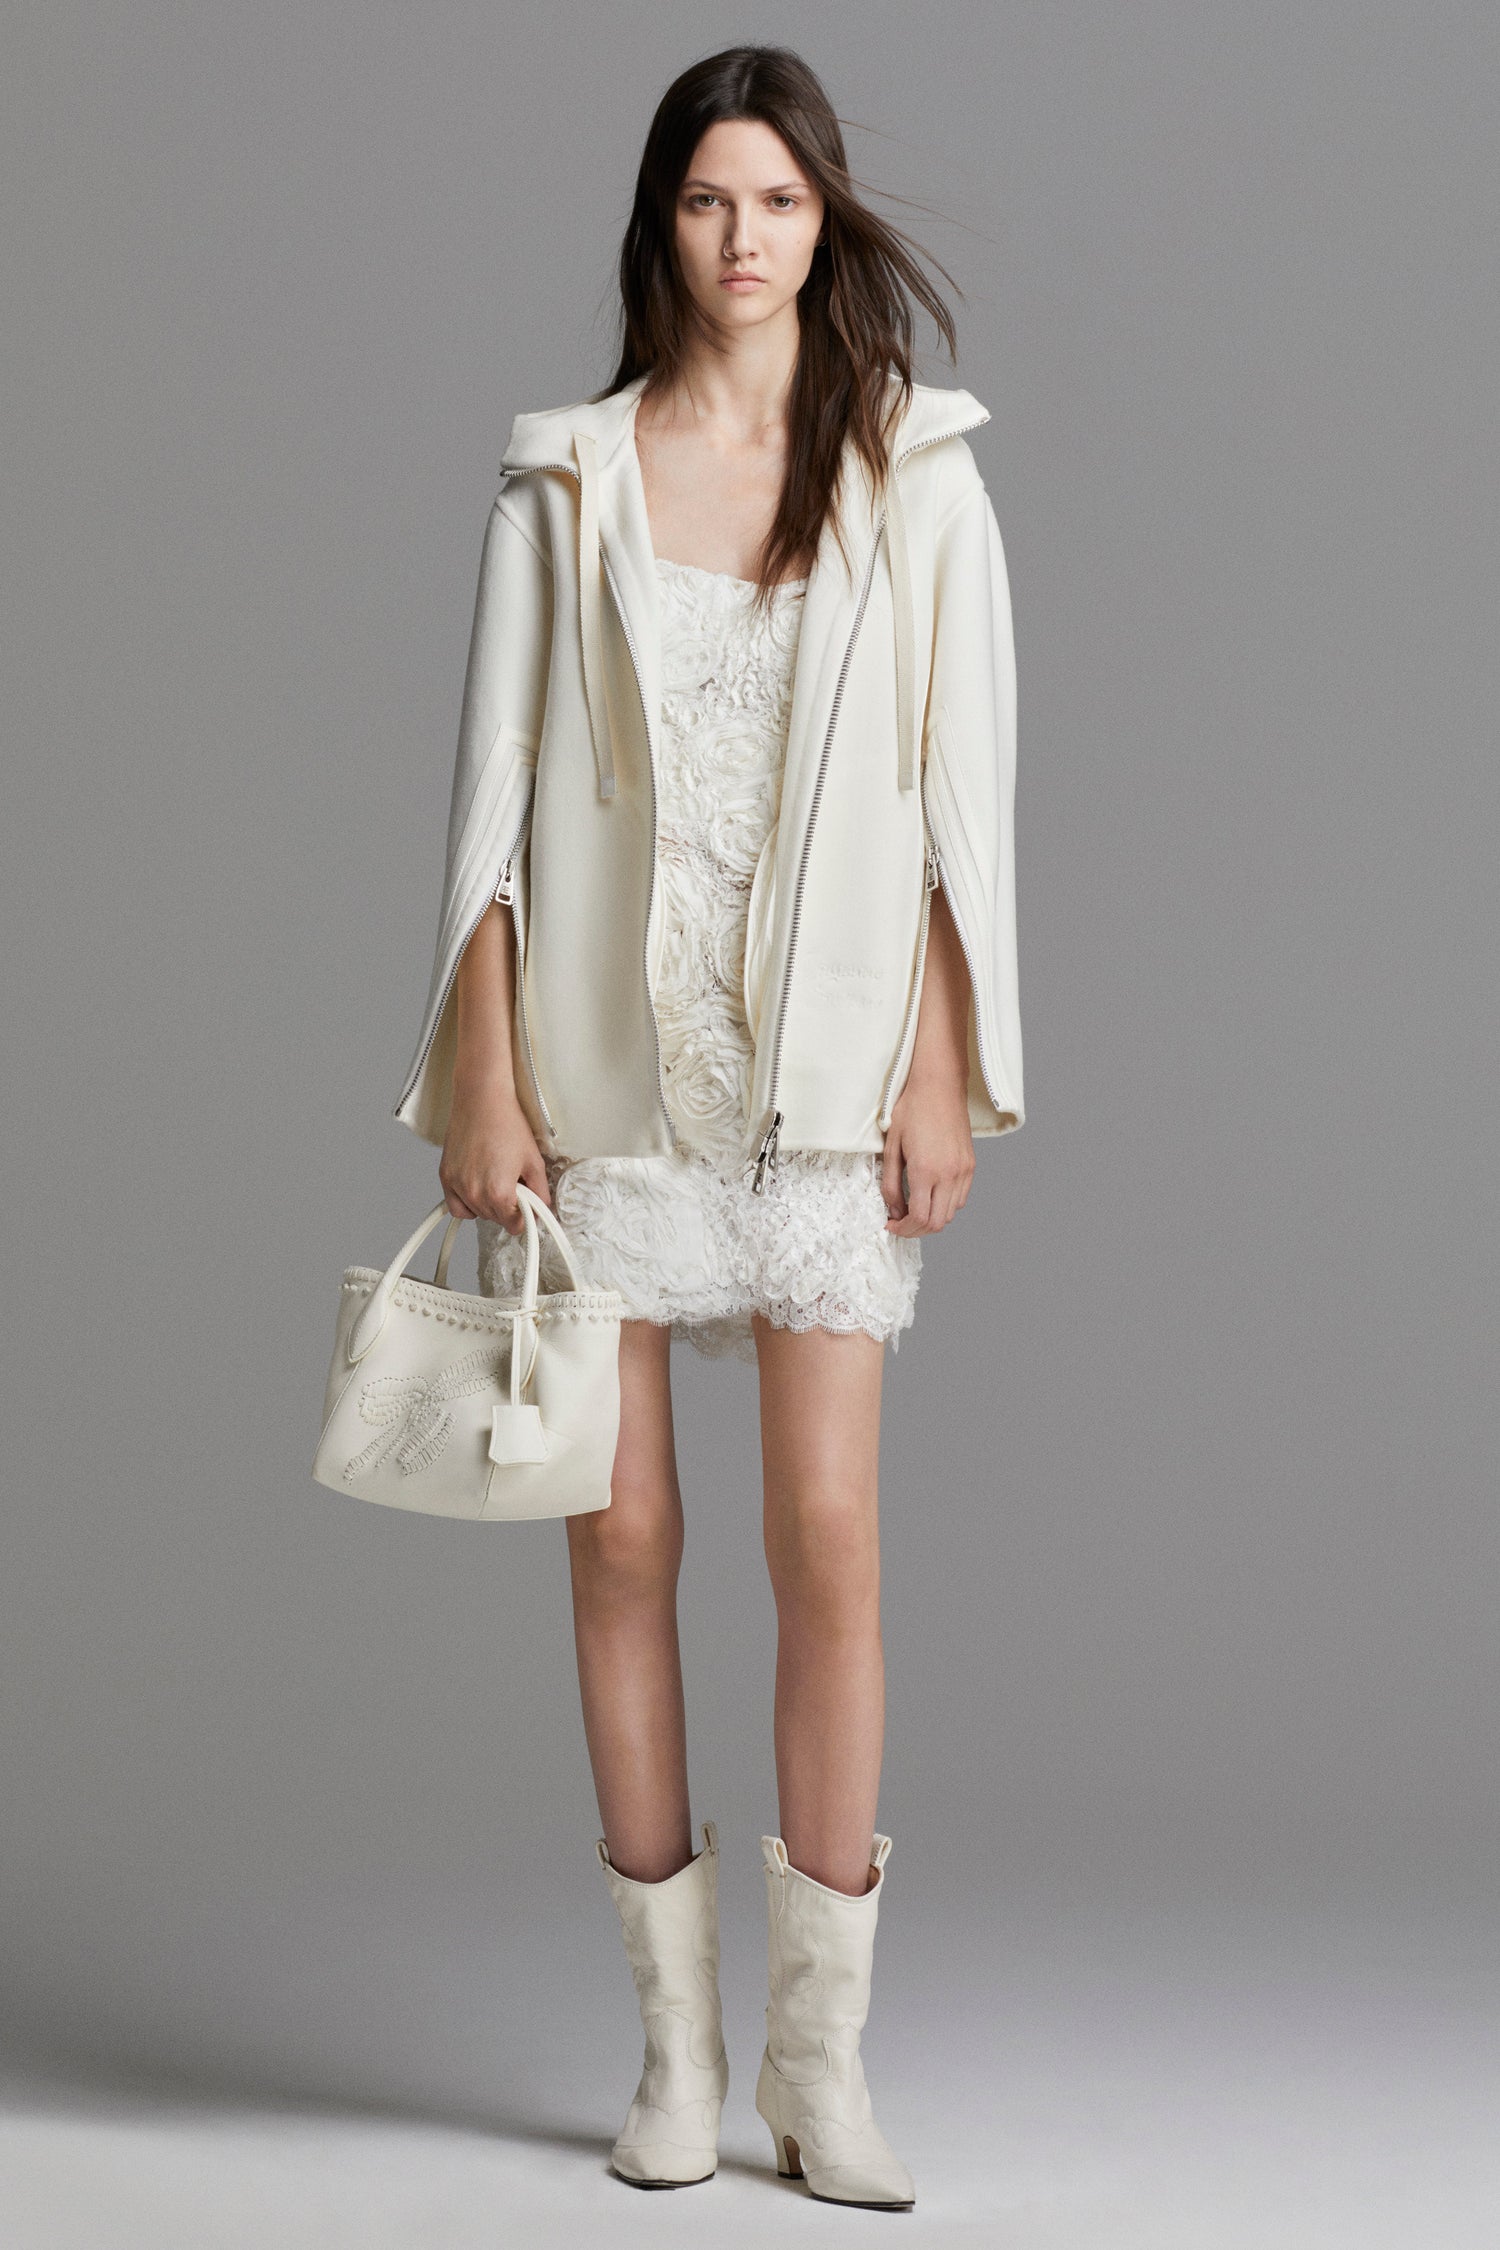 Resort 24: Jackets and outfit for women - Ermanno Scervino